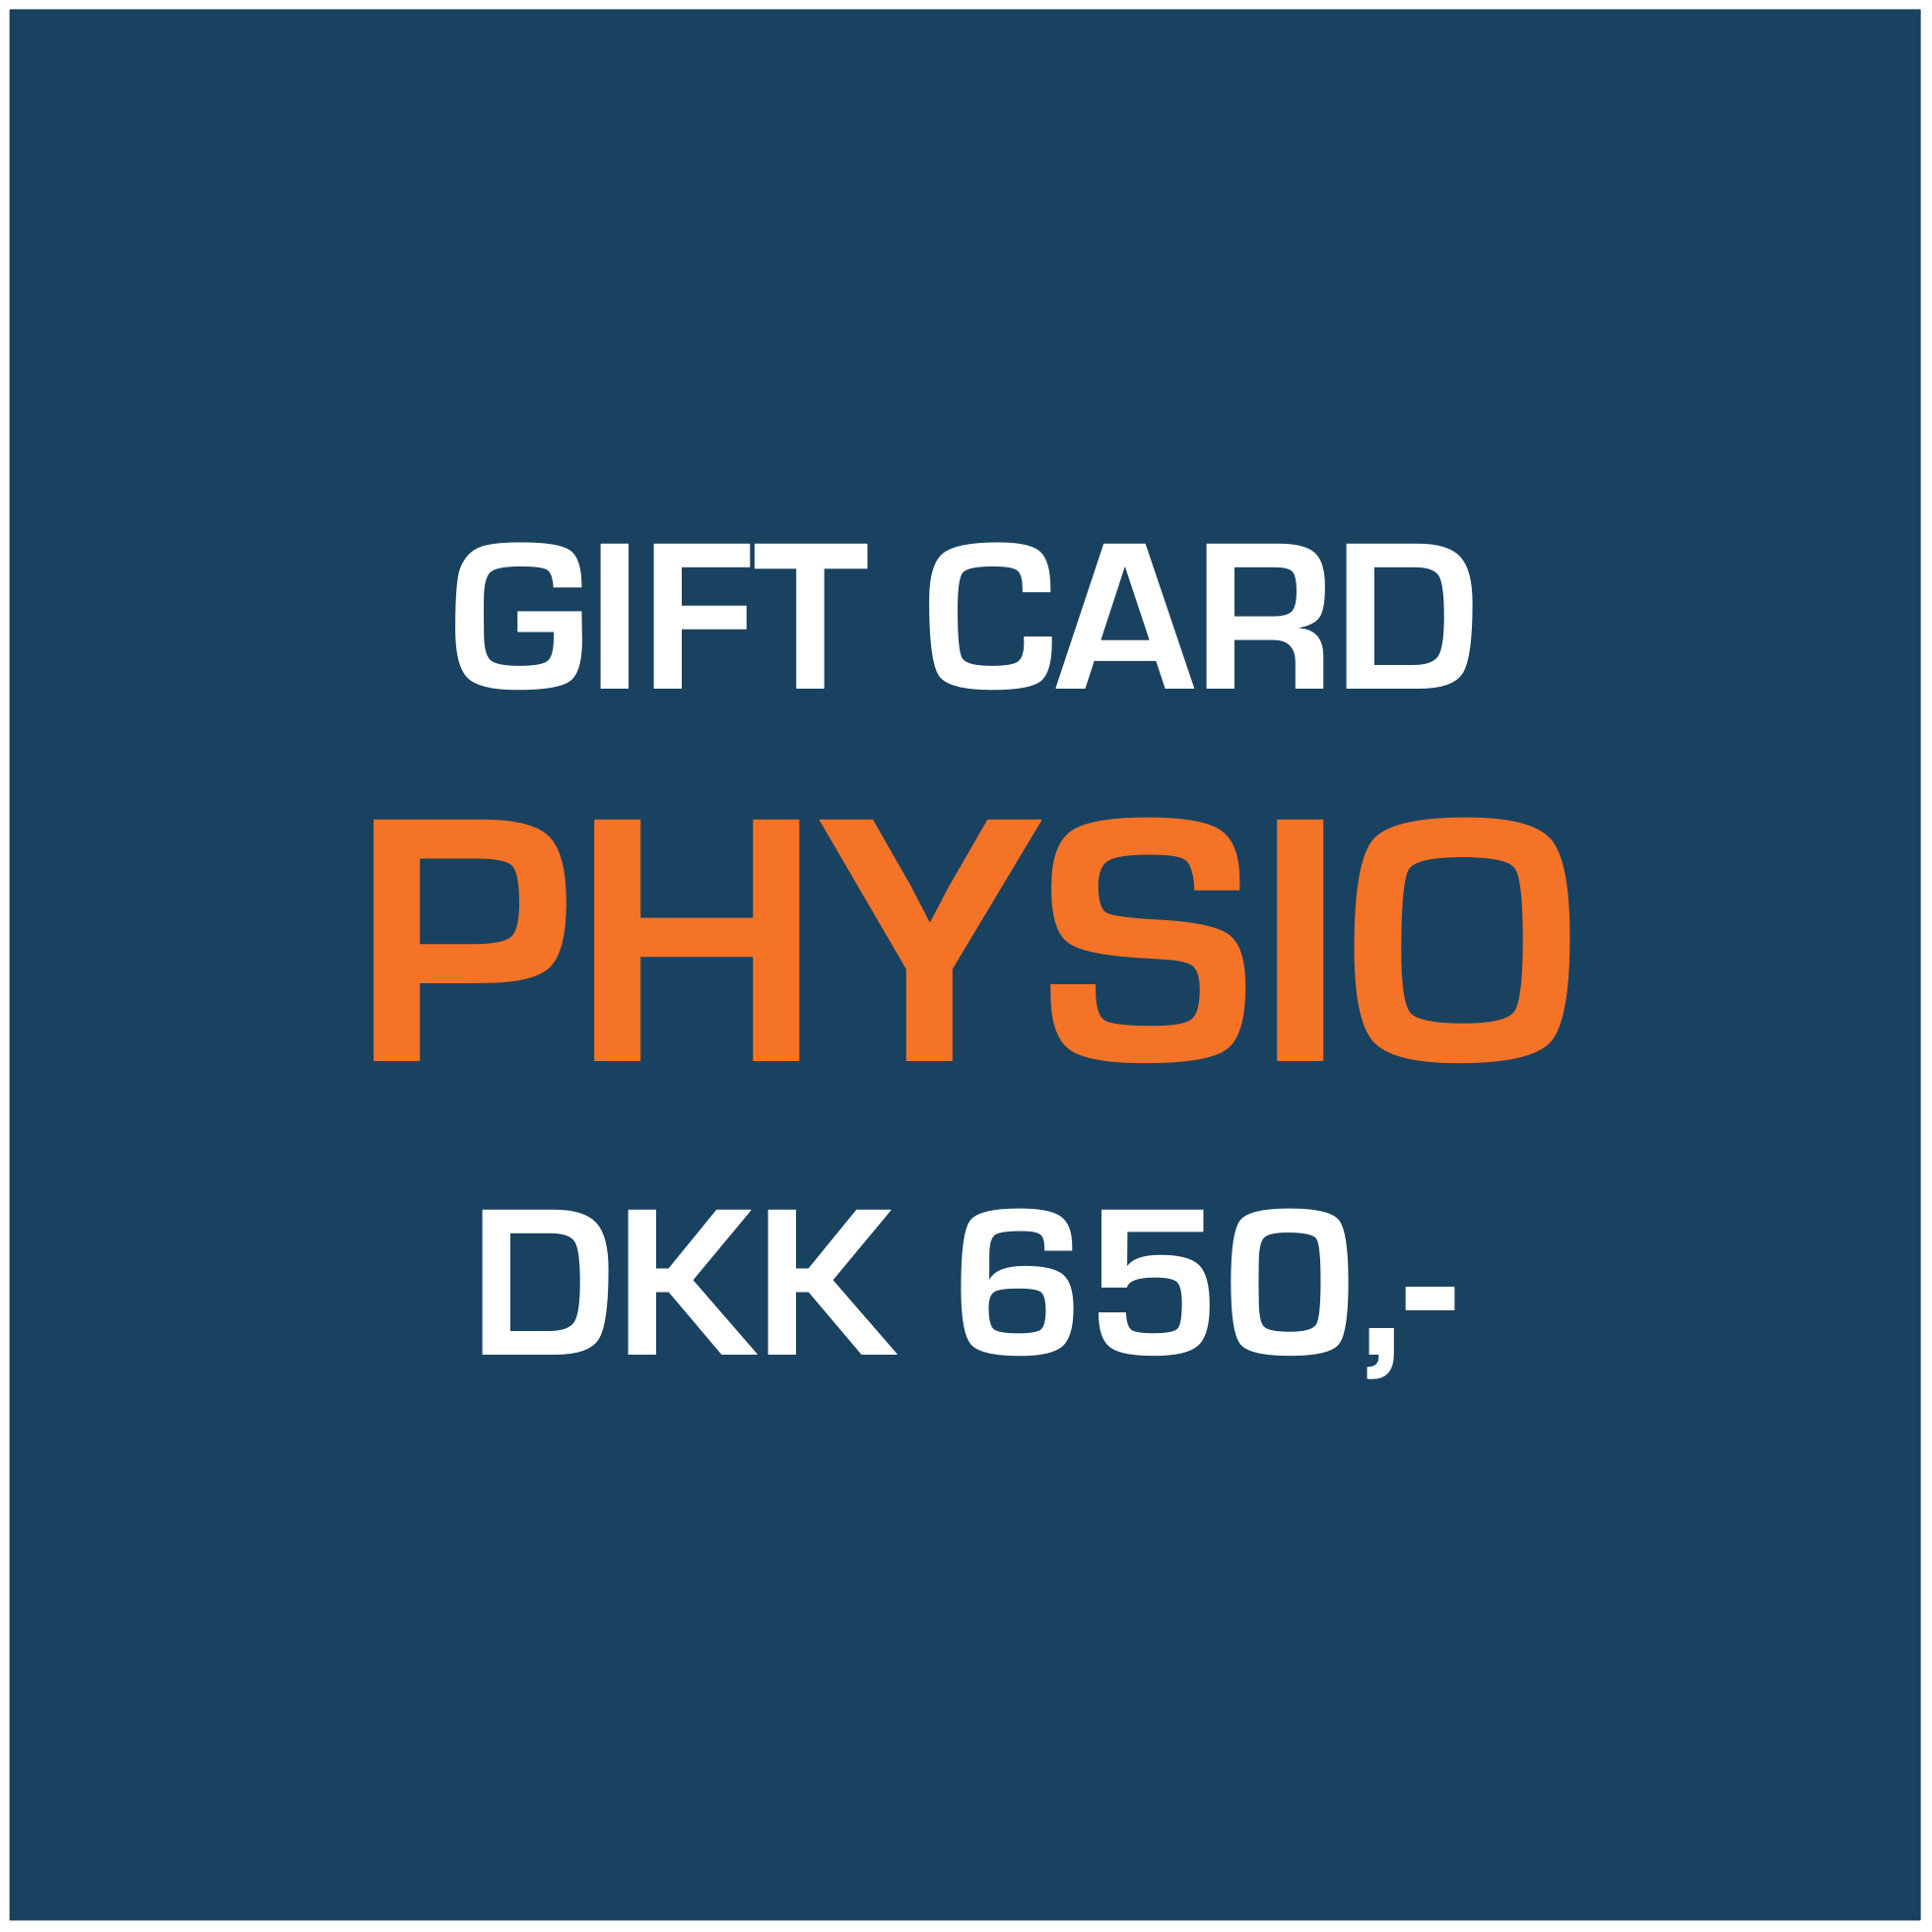 buy a gift card physio 650, 